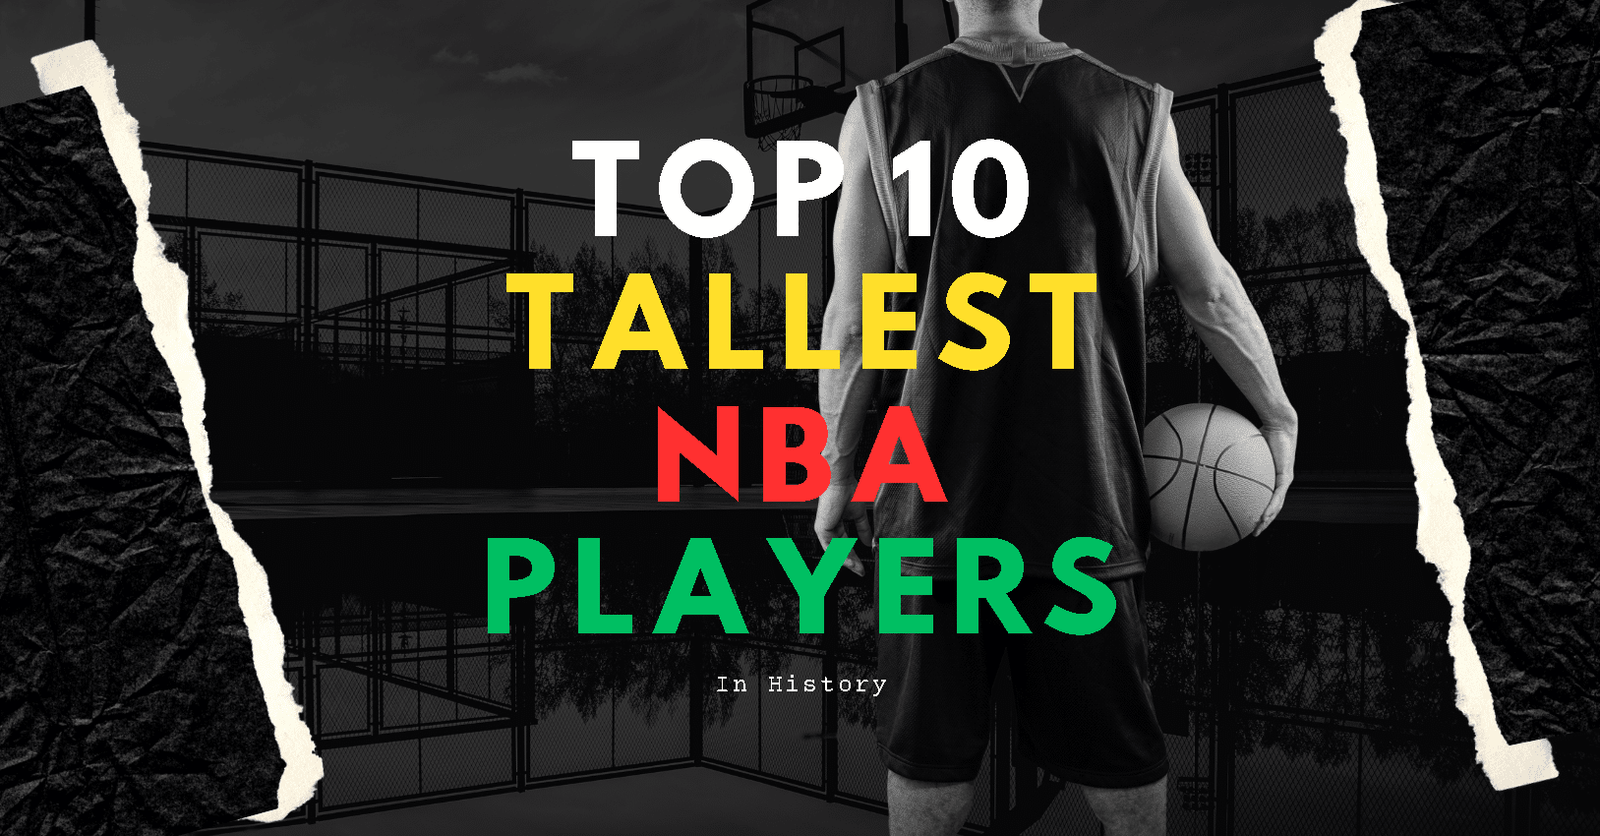 The 10 Tallest NBA Players of All Time